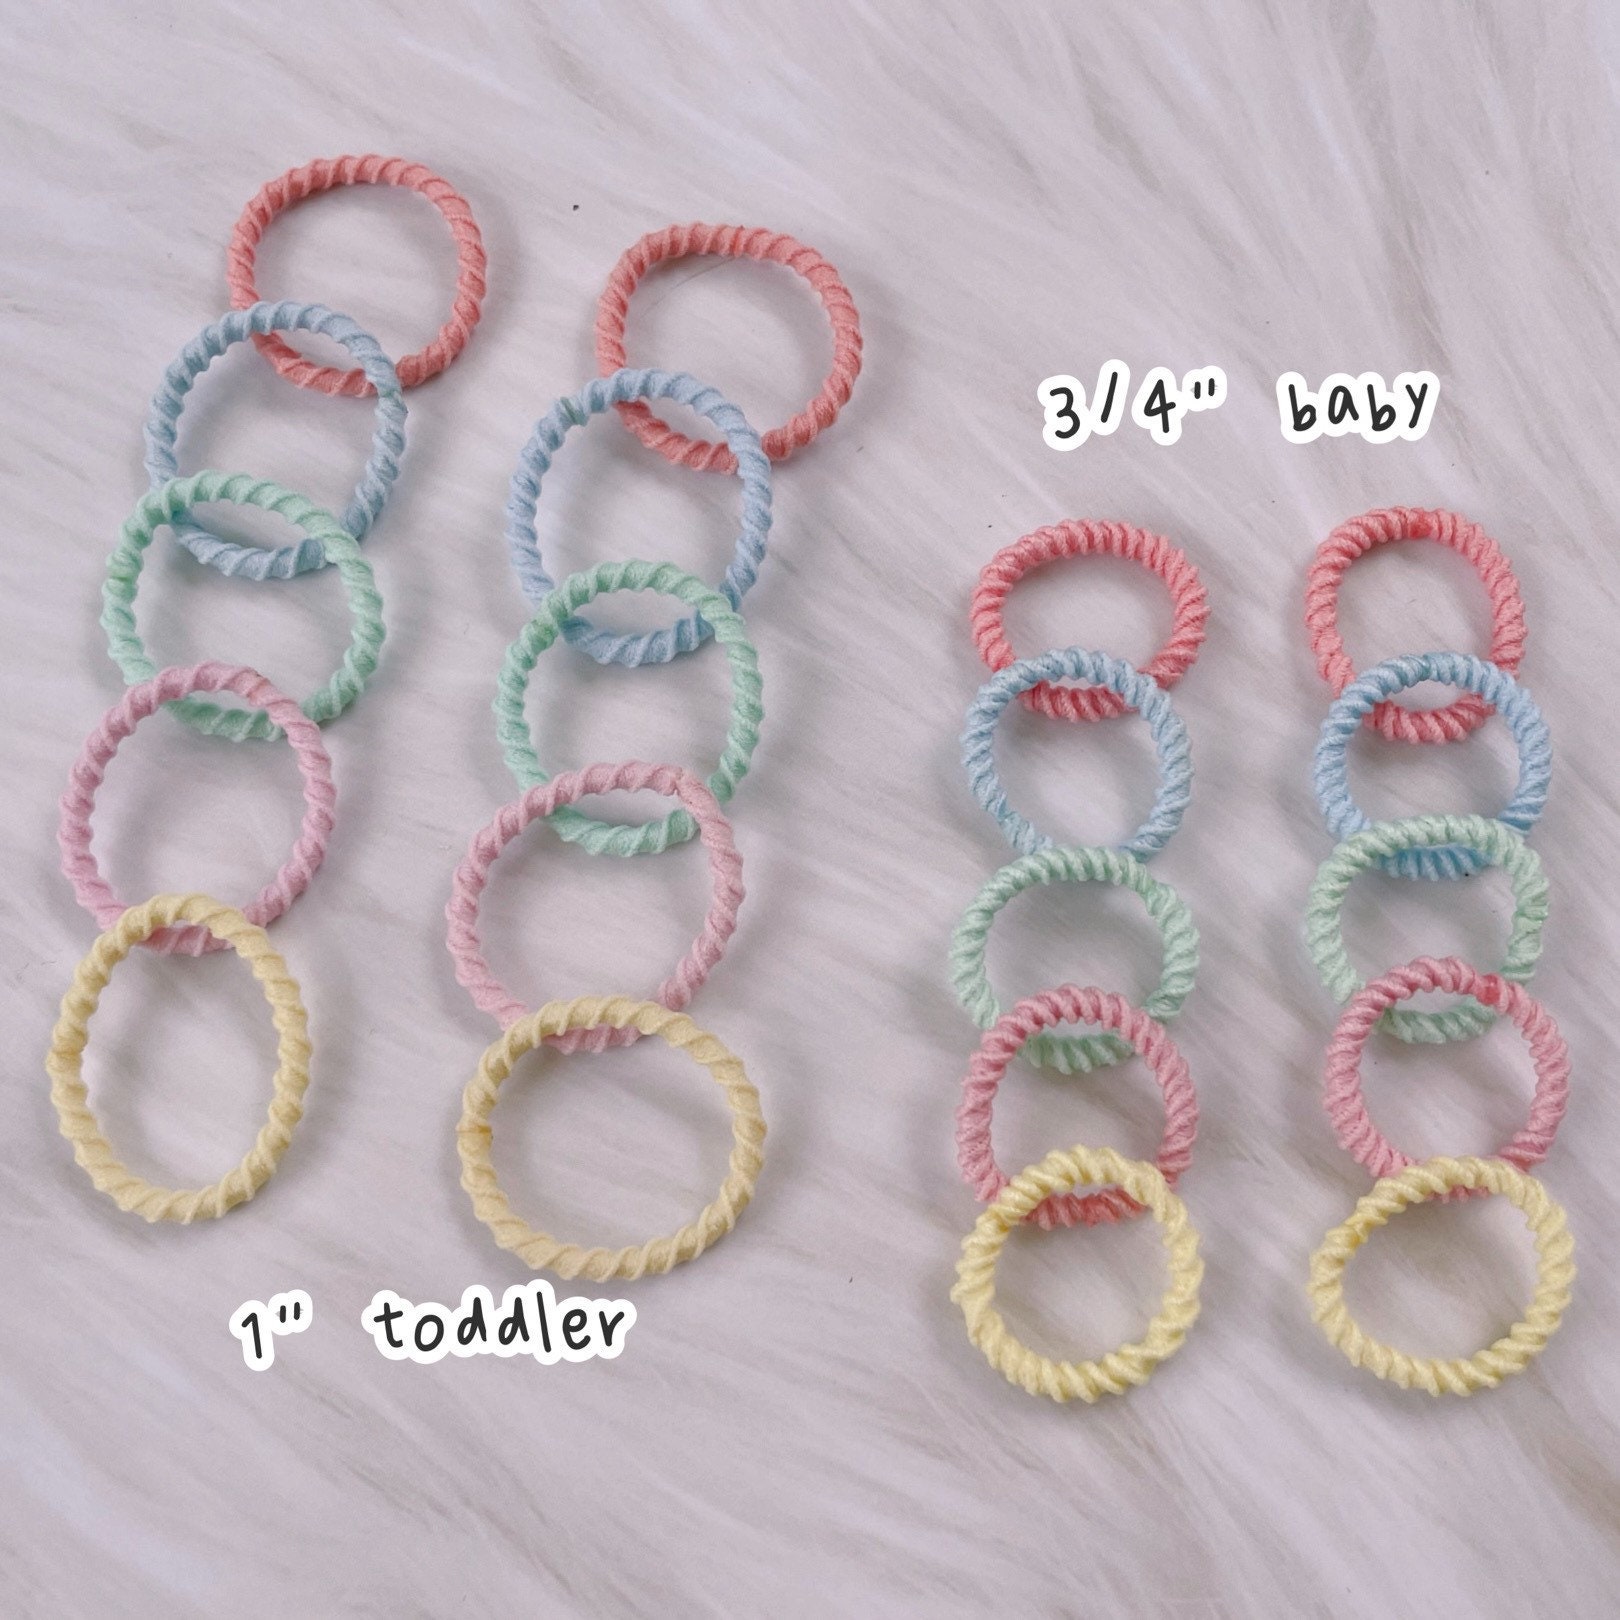 Adorable Baby Hair Ties to Style Your Little One's Hair